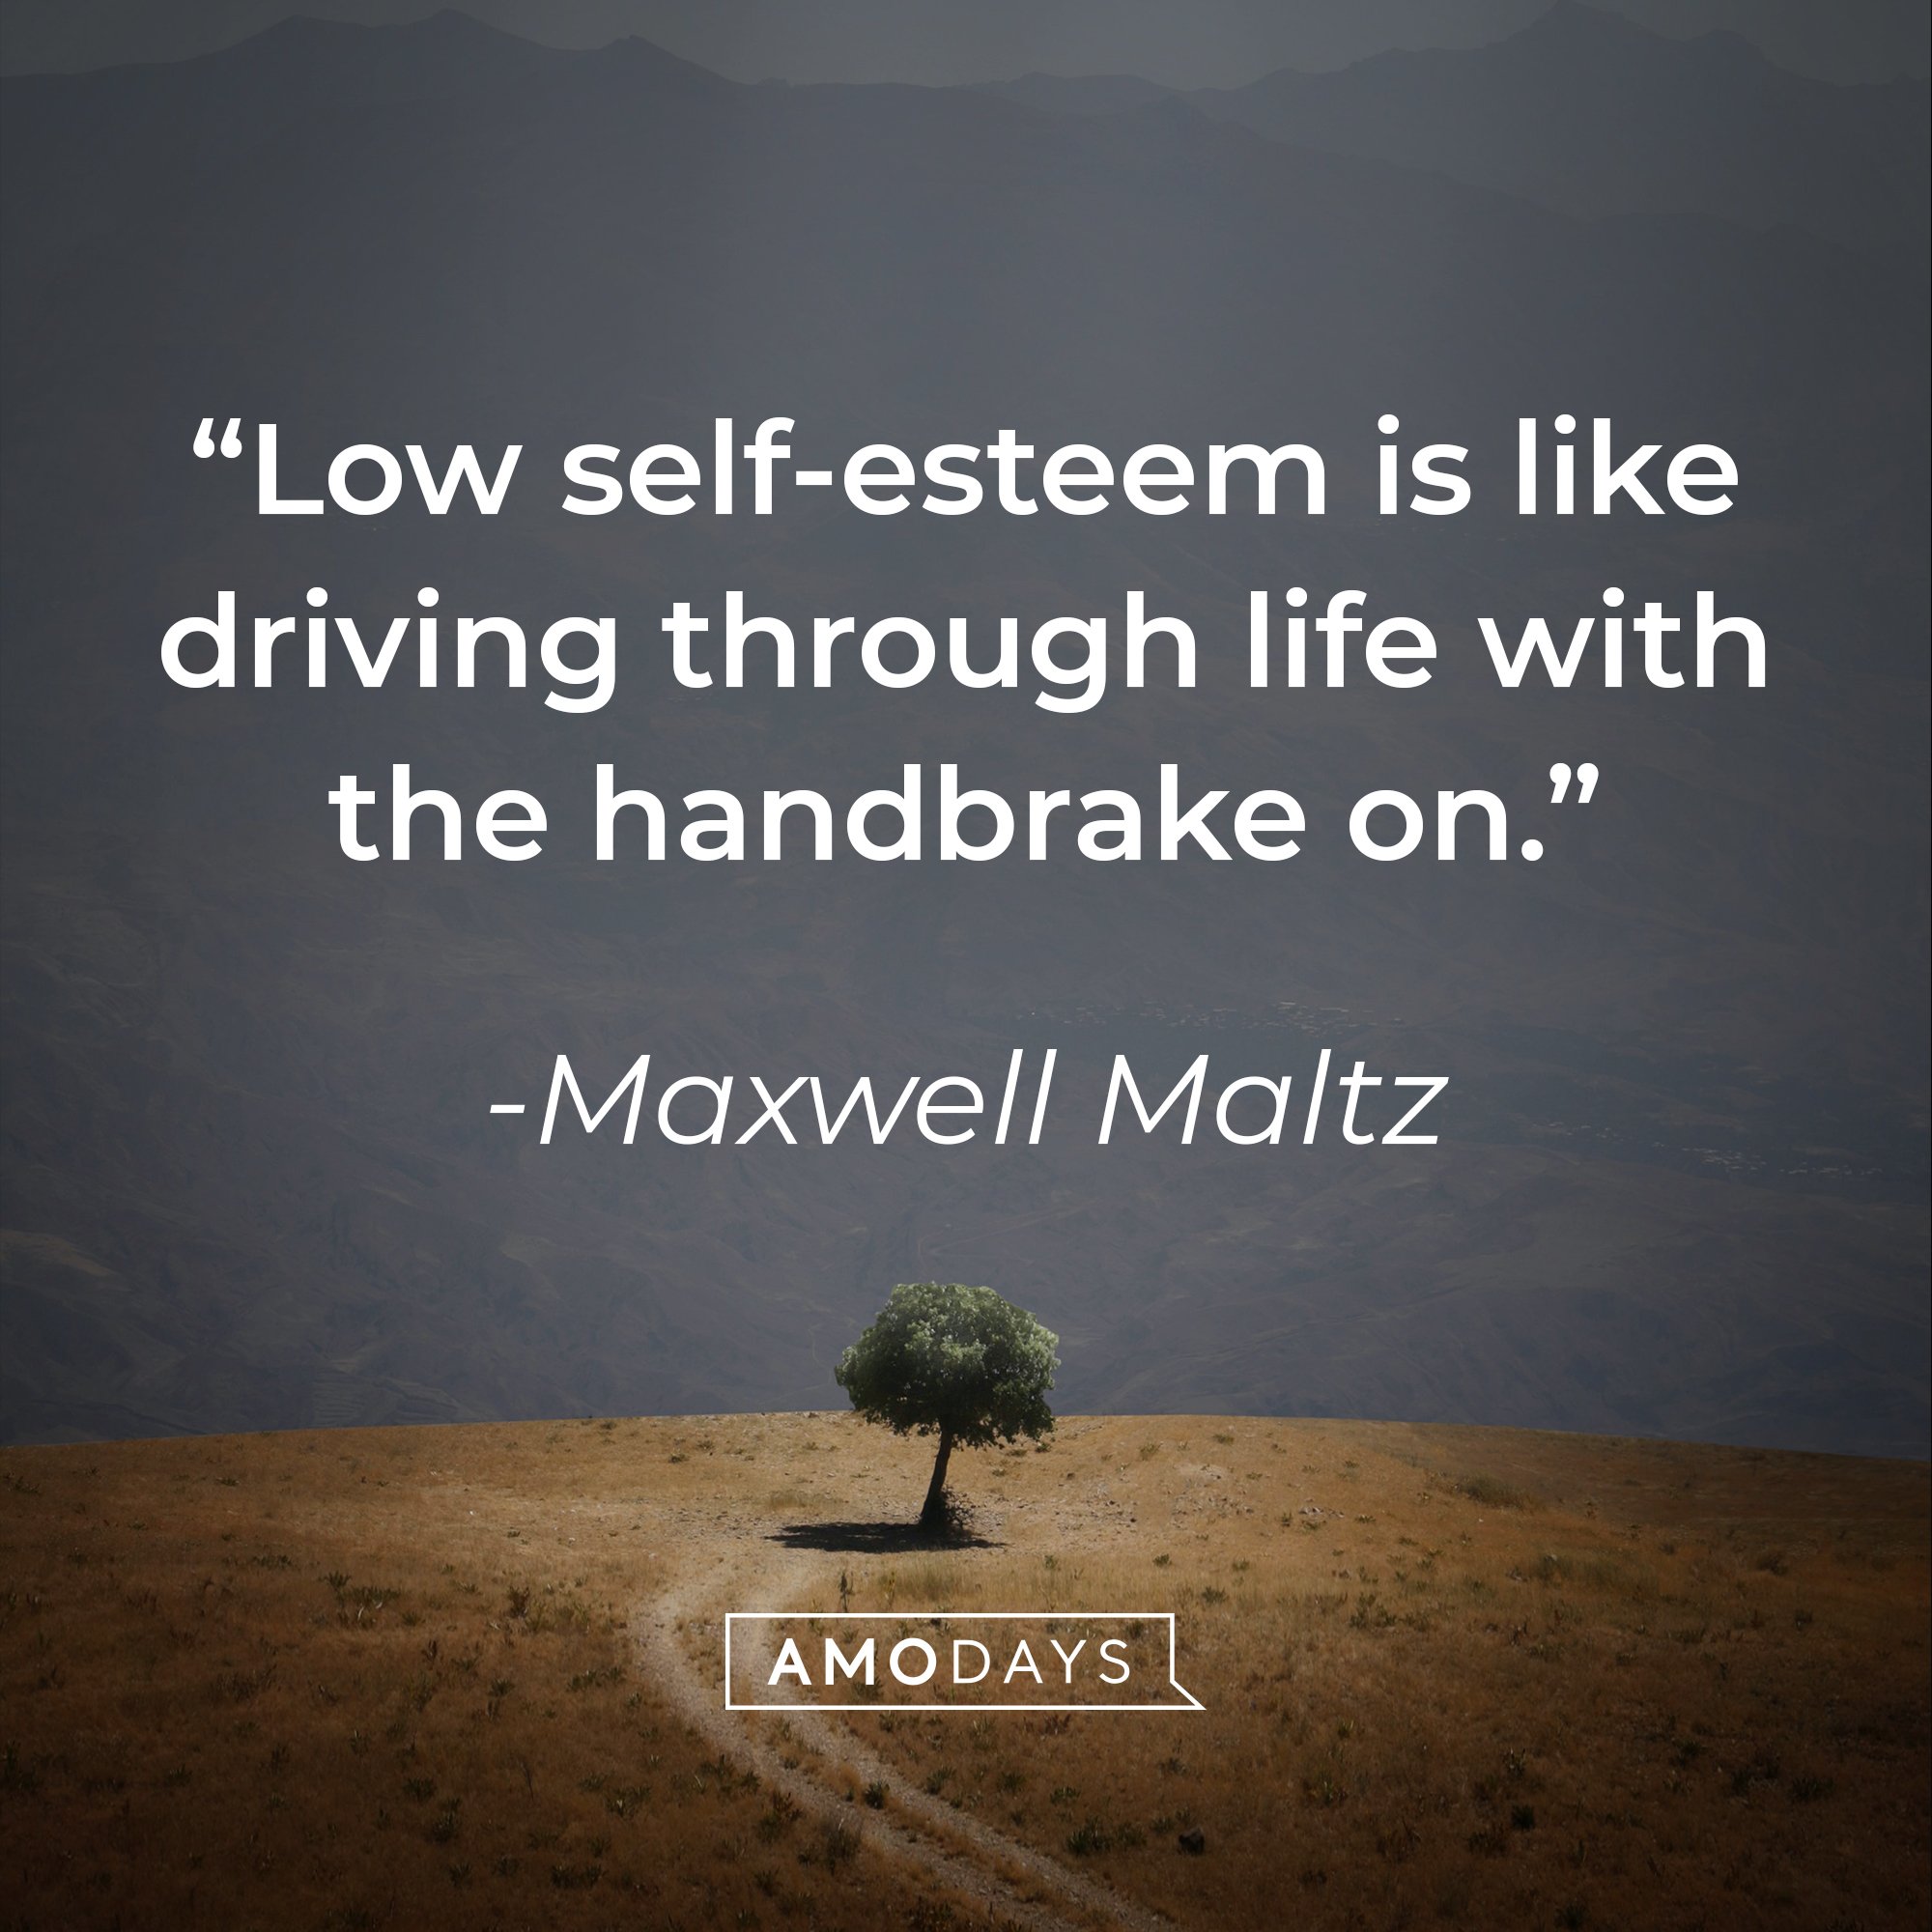 Maxwell Maltz's quote: “Low self-esteem is like driving through life with the handbrake on.” | Image: AmoDays